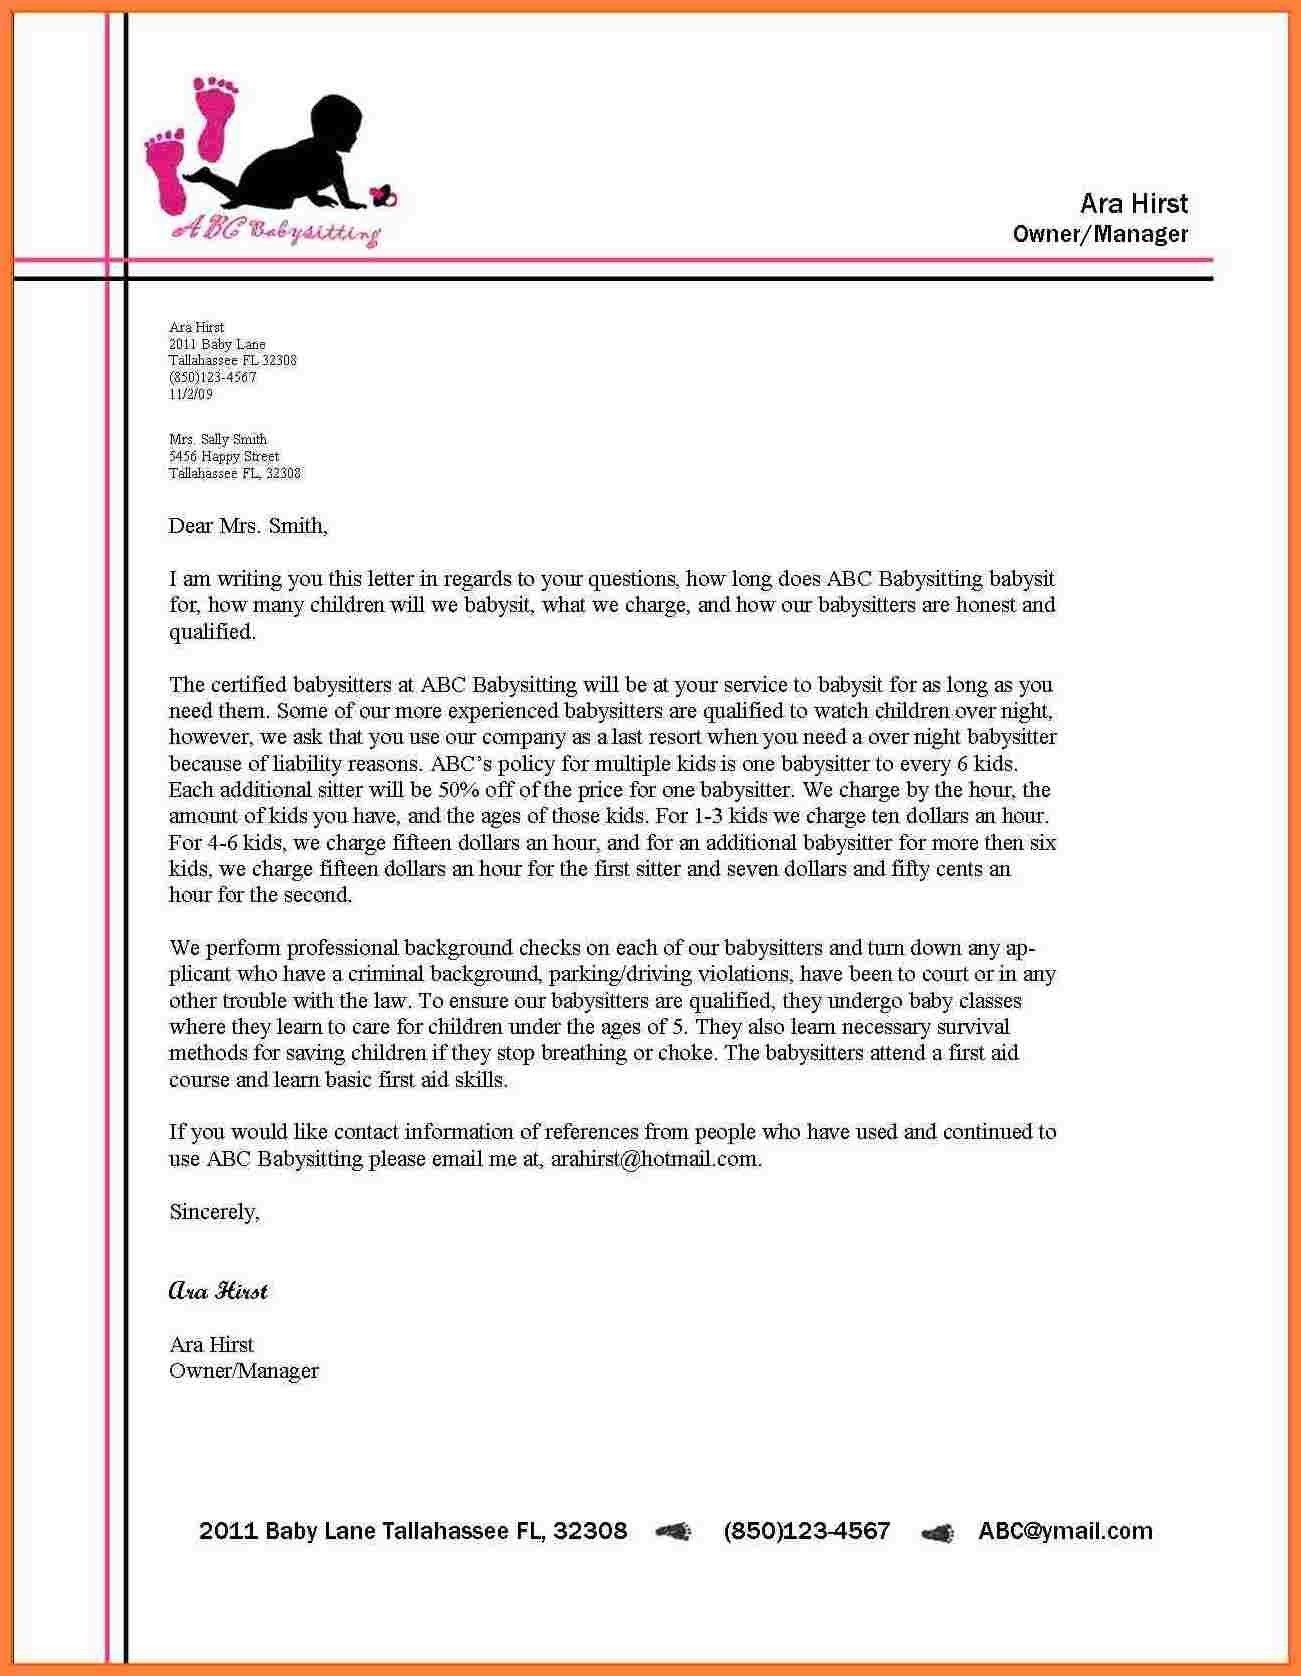 Example Of A Business Letter With Letterhead Filename – reinadela 